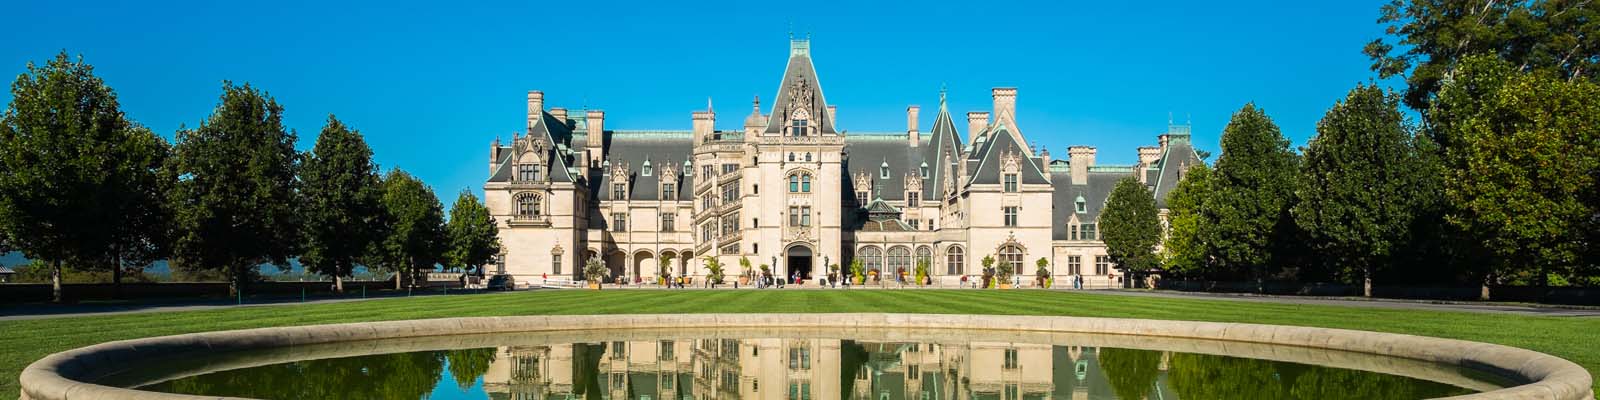 This is an image of the Biltmore Estate in Asheville North Carolina. ASTA-USA provides professional translation services in this city.